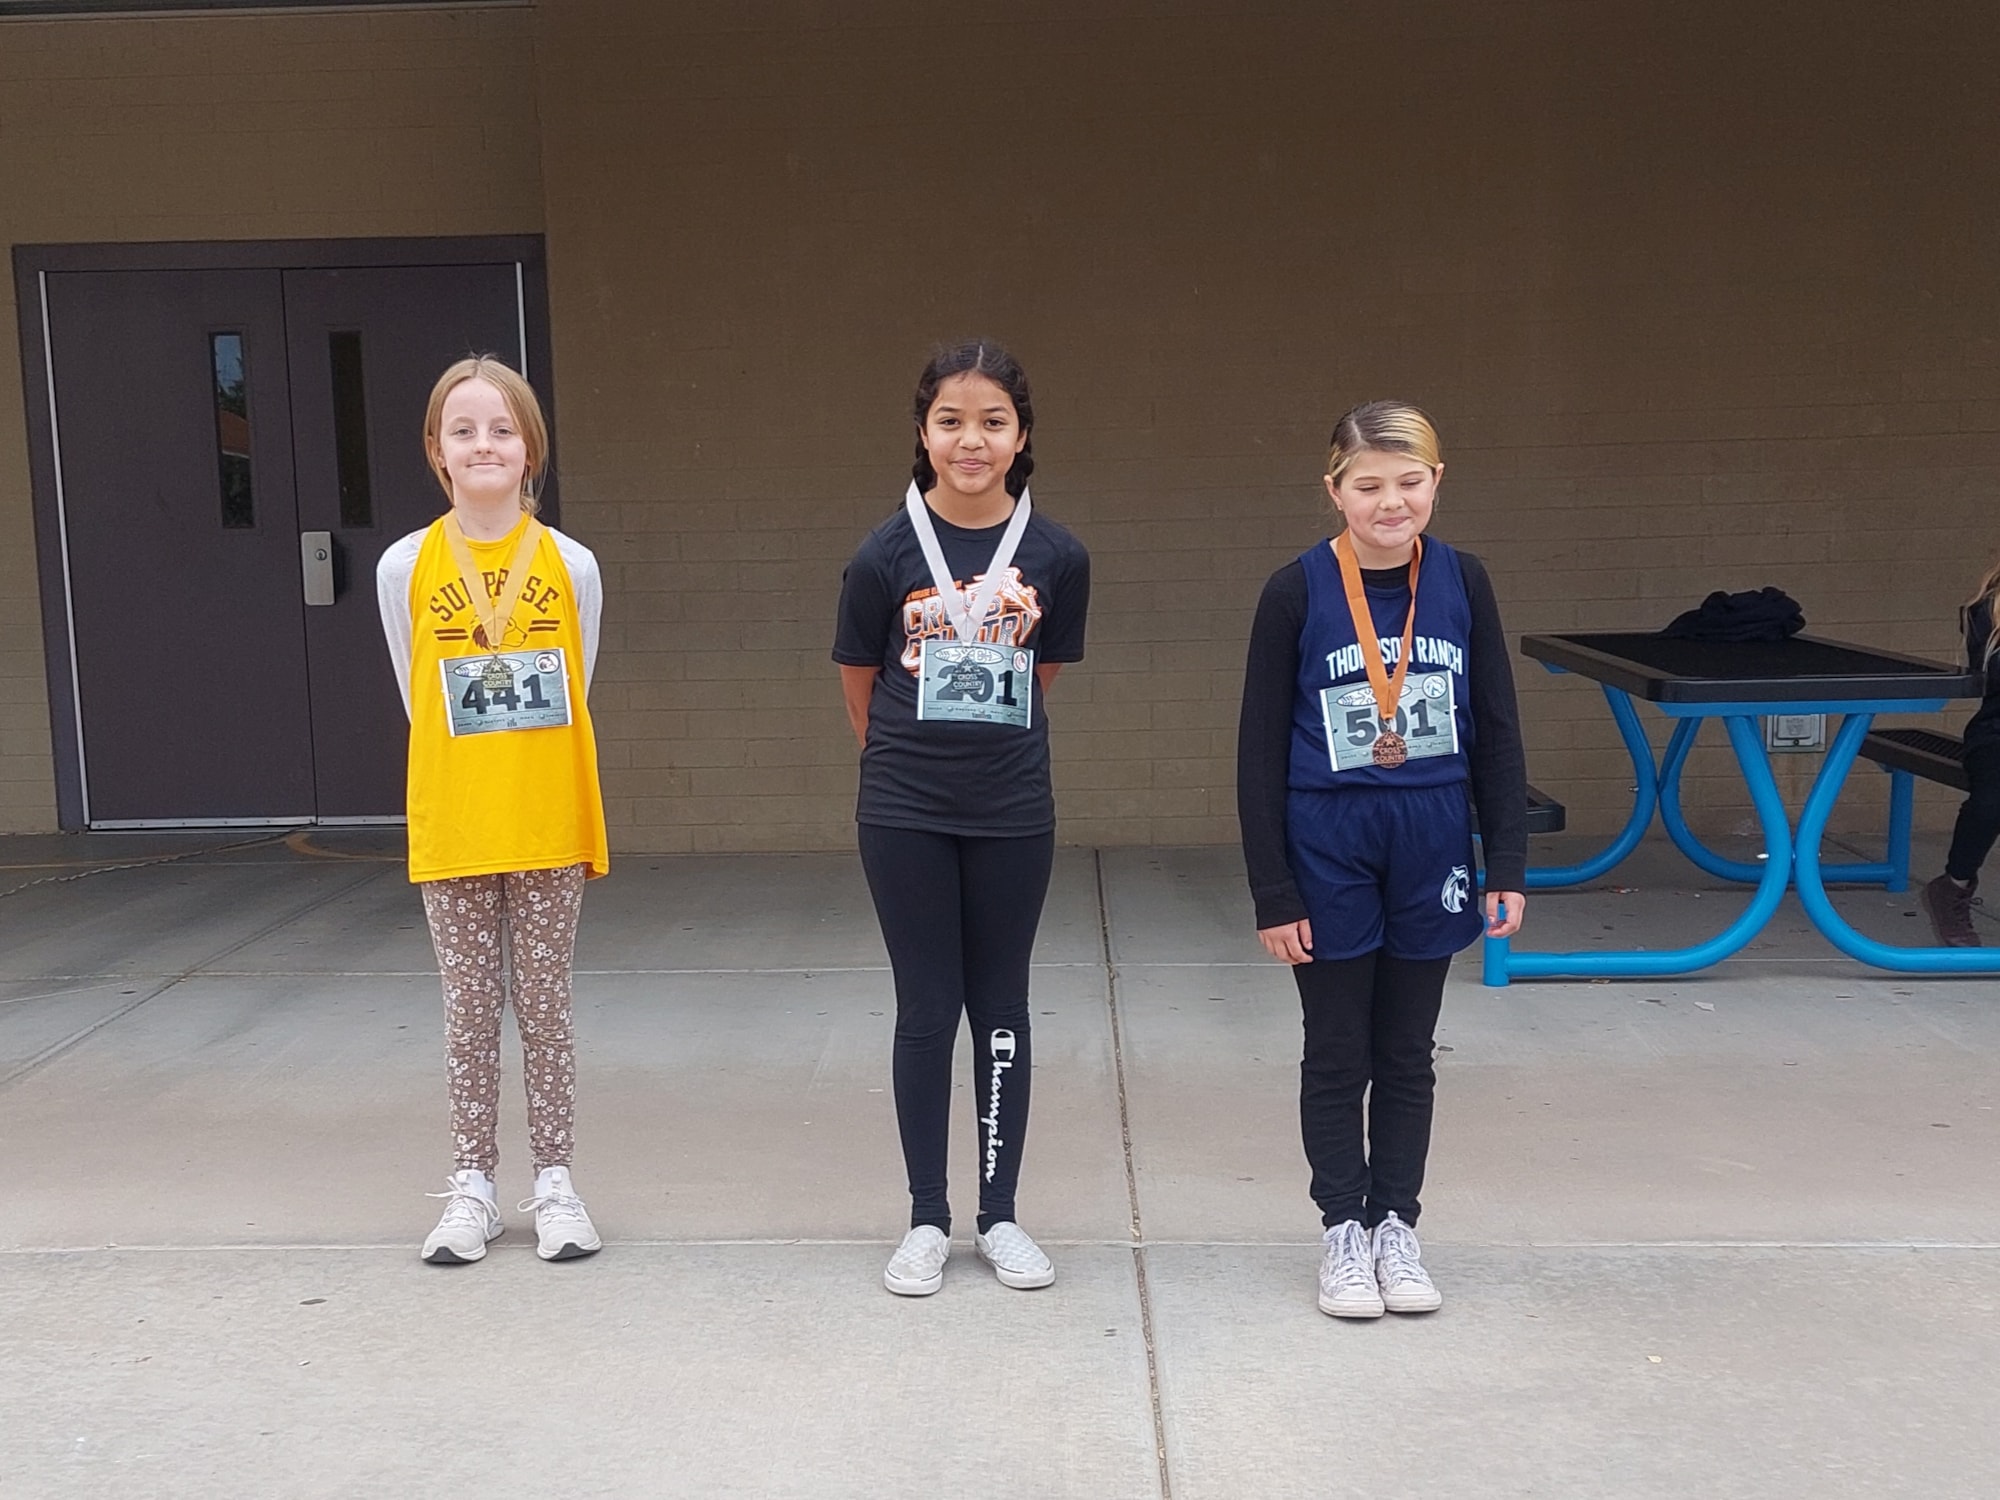 Students wearing cross country medals.